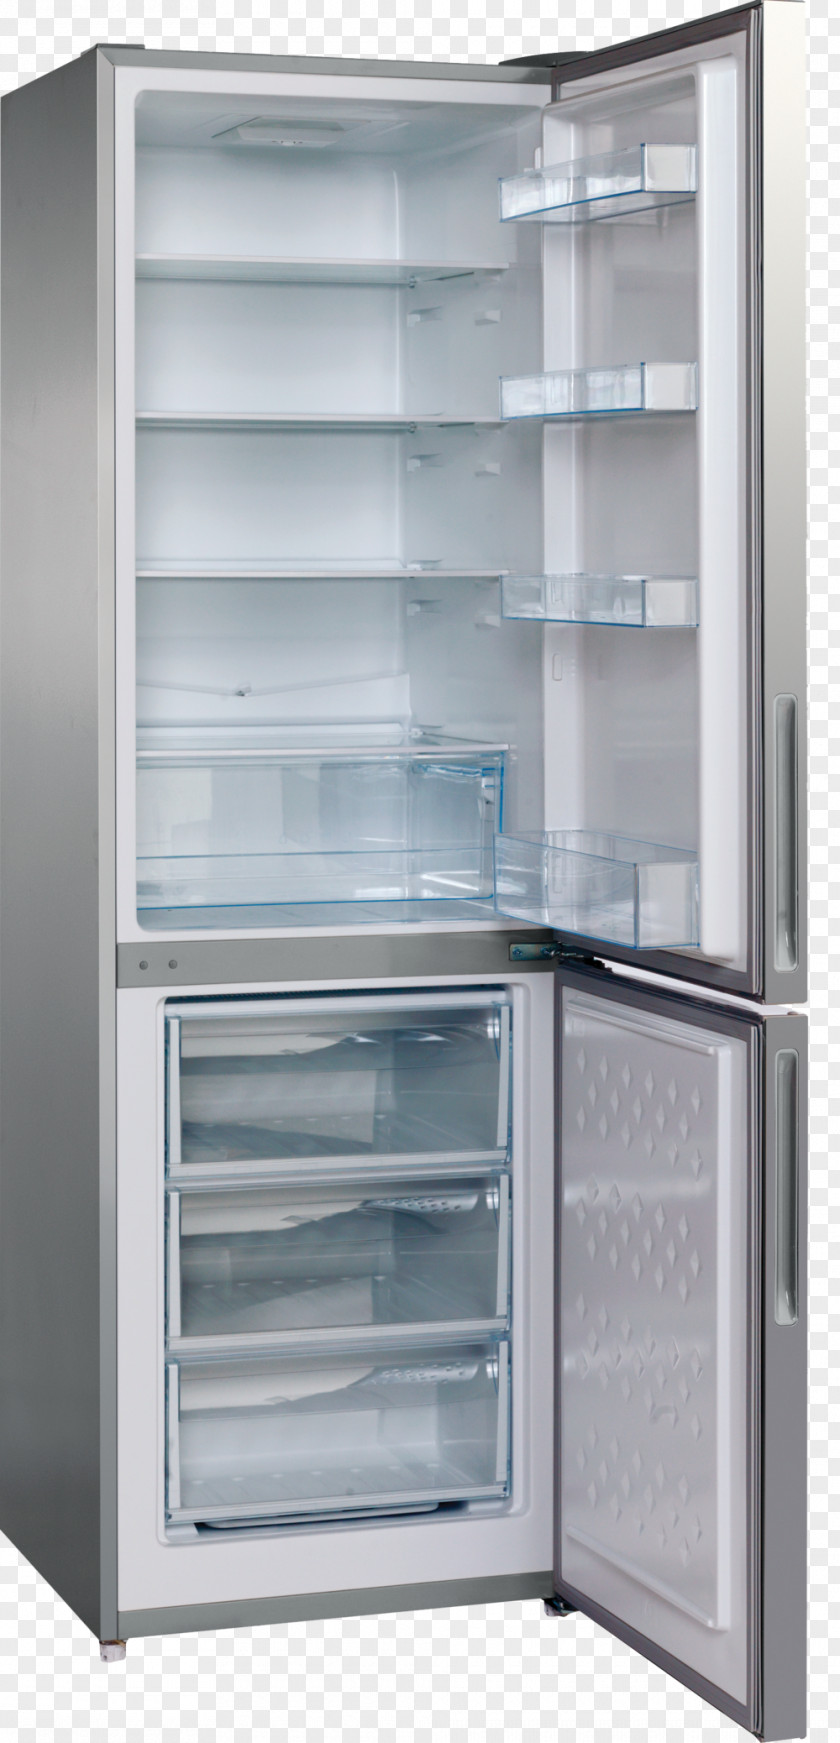 Grills Electrolux EN3487AOO Fridge Freezer Frost Free 239+78Litres Brown Whirlpool BSNF 8152 OX Freezers Miele Refrigerator Right SKF PNG